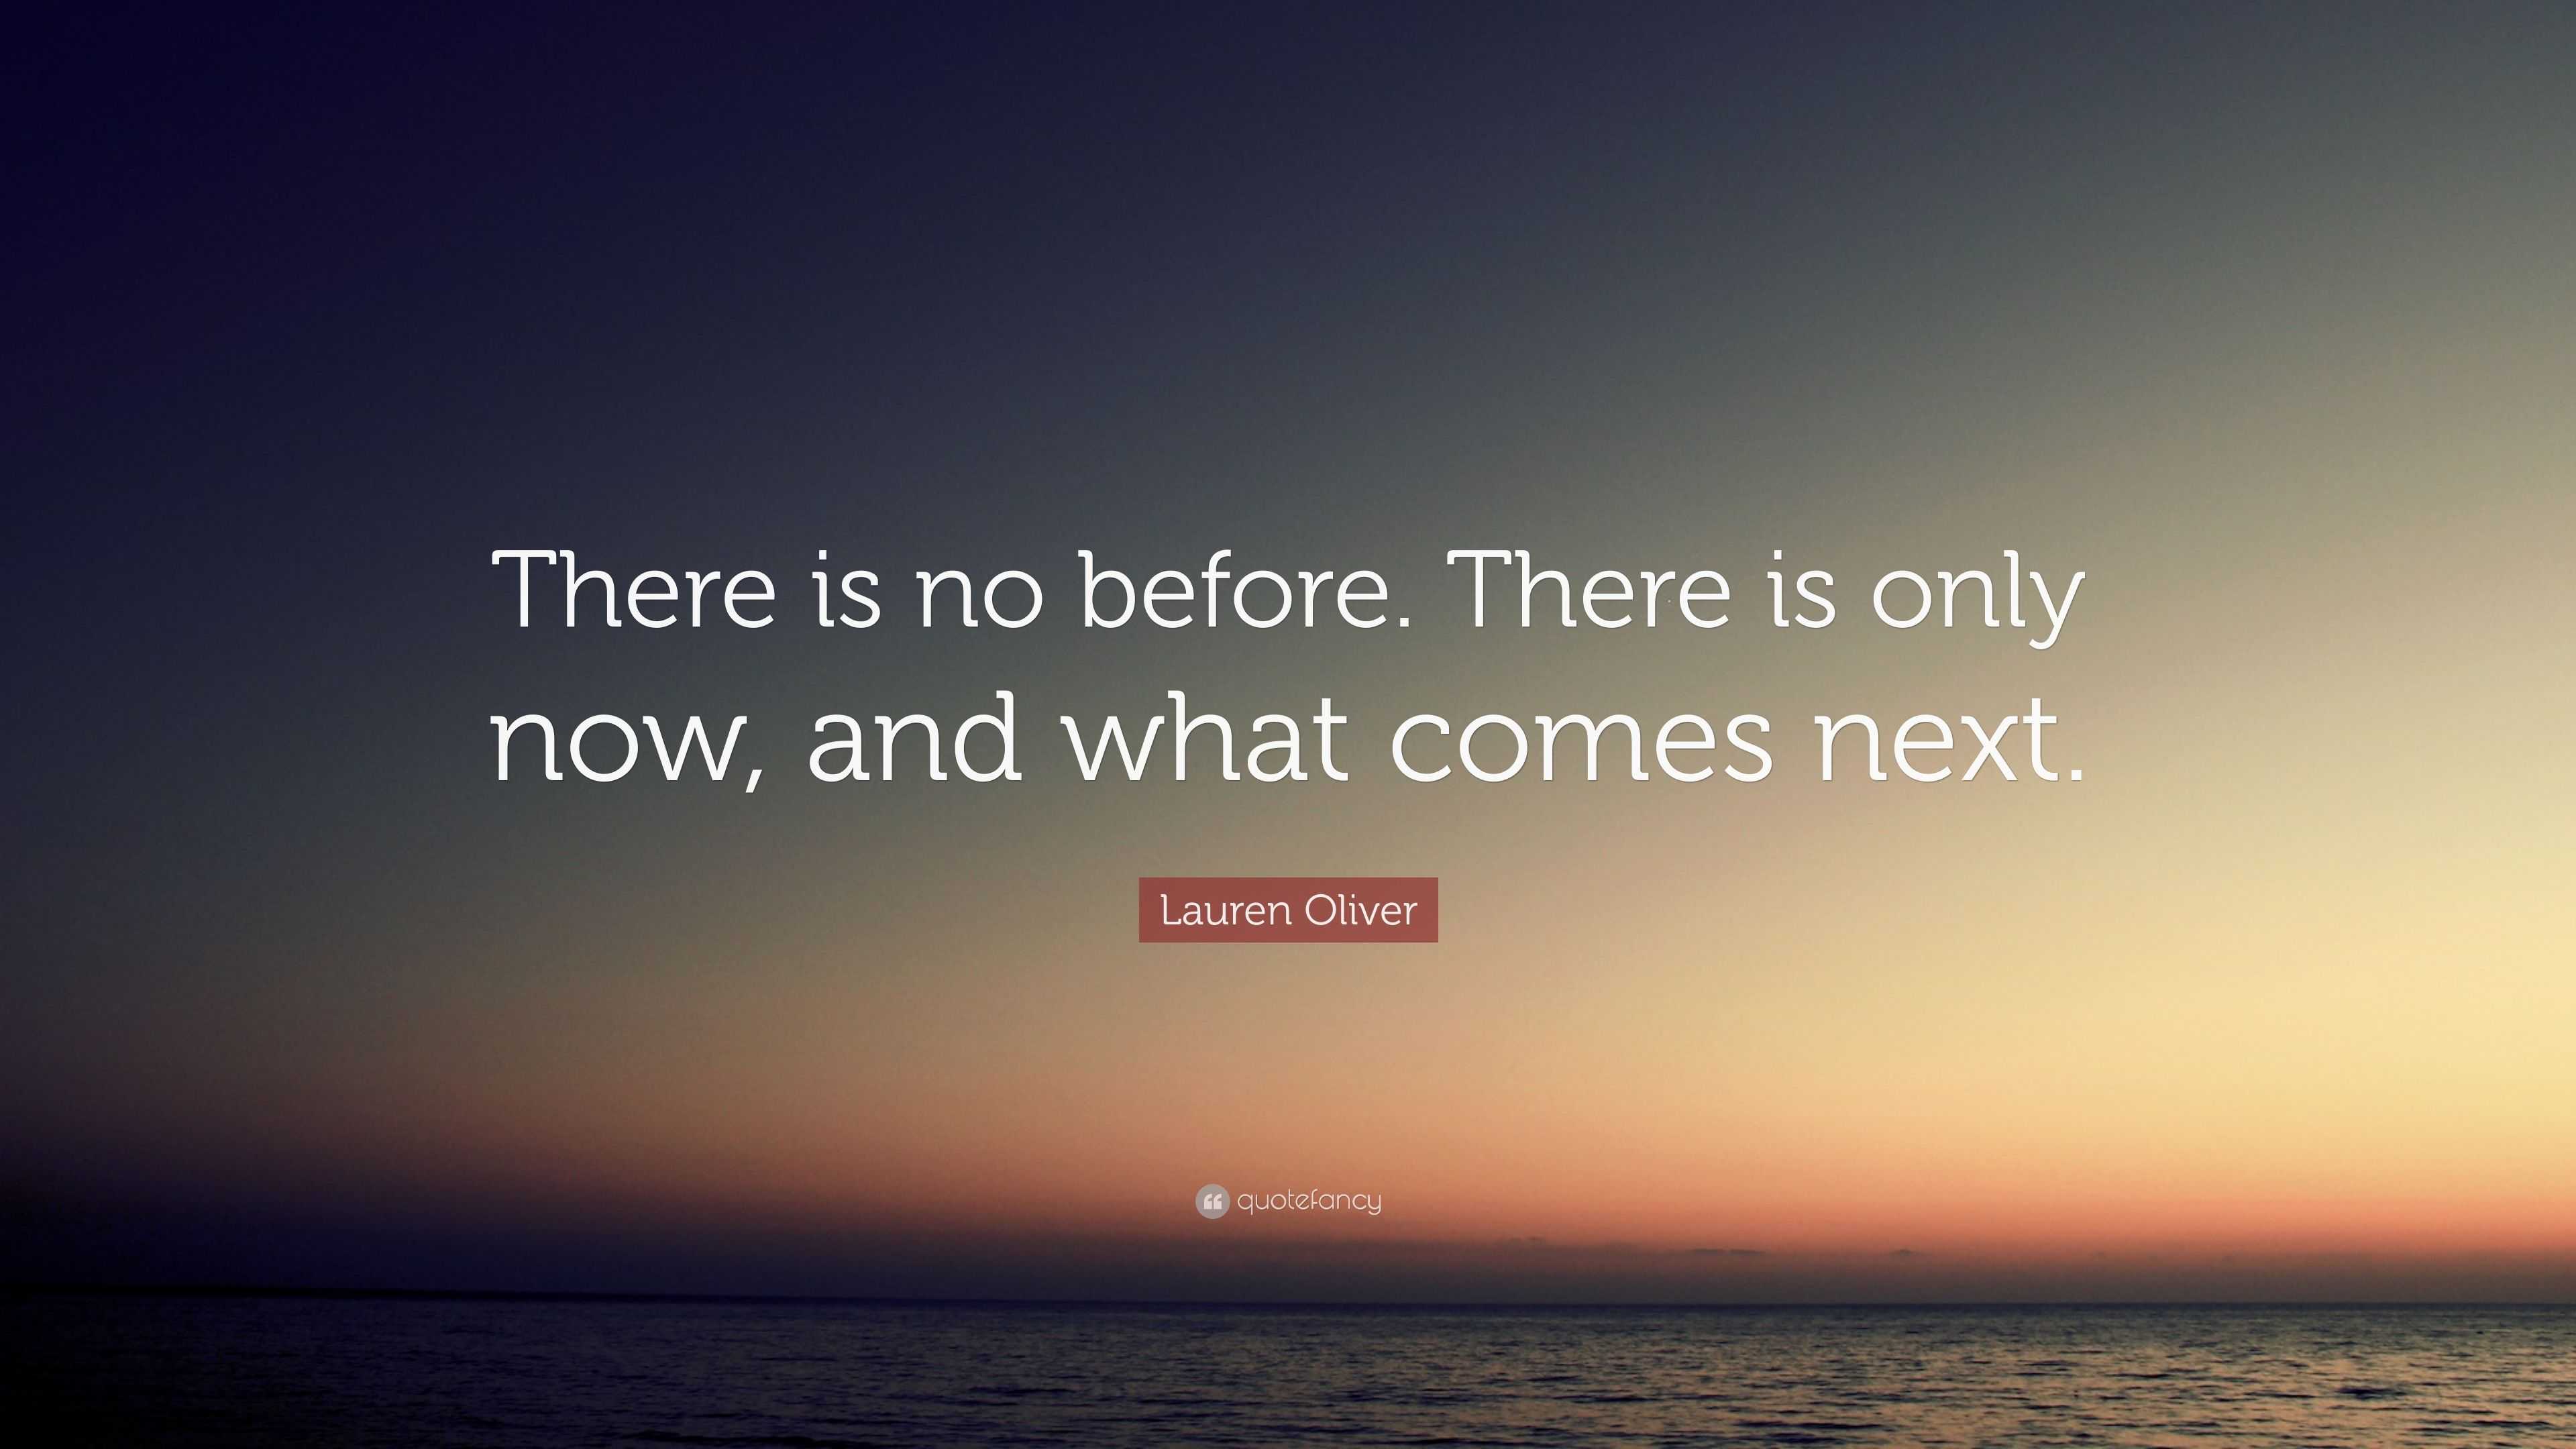 Lauren Oliver Quote: “There is no before. There is only now, and what ...